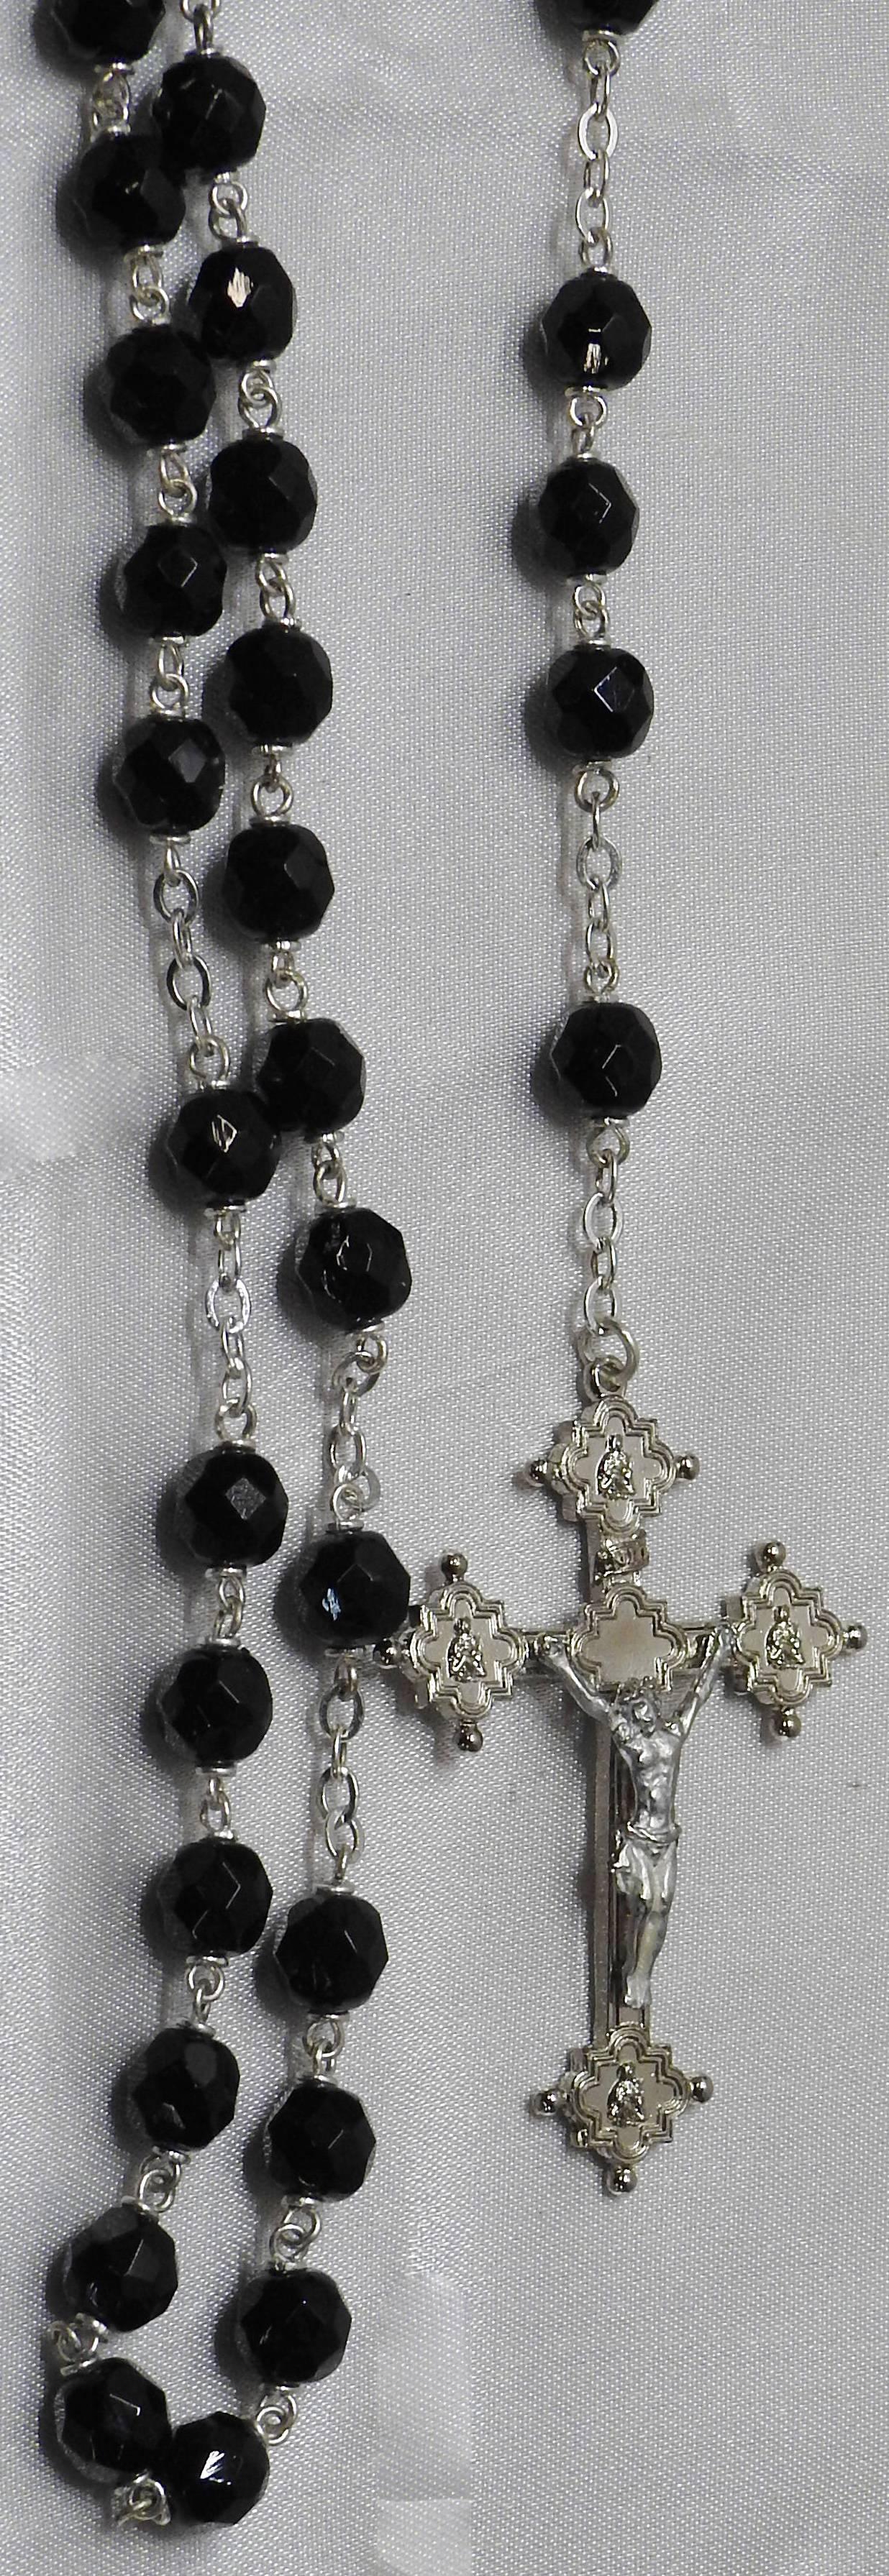 This is a rosary from the Vatican Library collection. It was manufactured in the Czech Republic and made of genuine Czech fire-polished crystal beads, this rosary features a crucifix inspired by crosses in the Museo Sacro, Biblioteca Apostolica